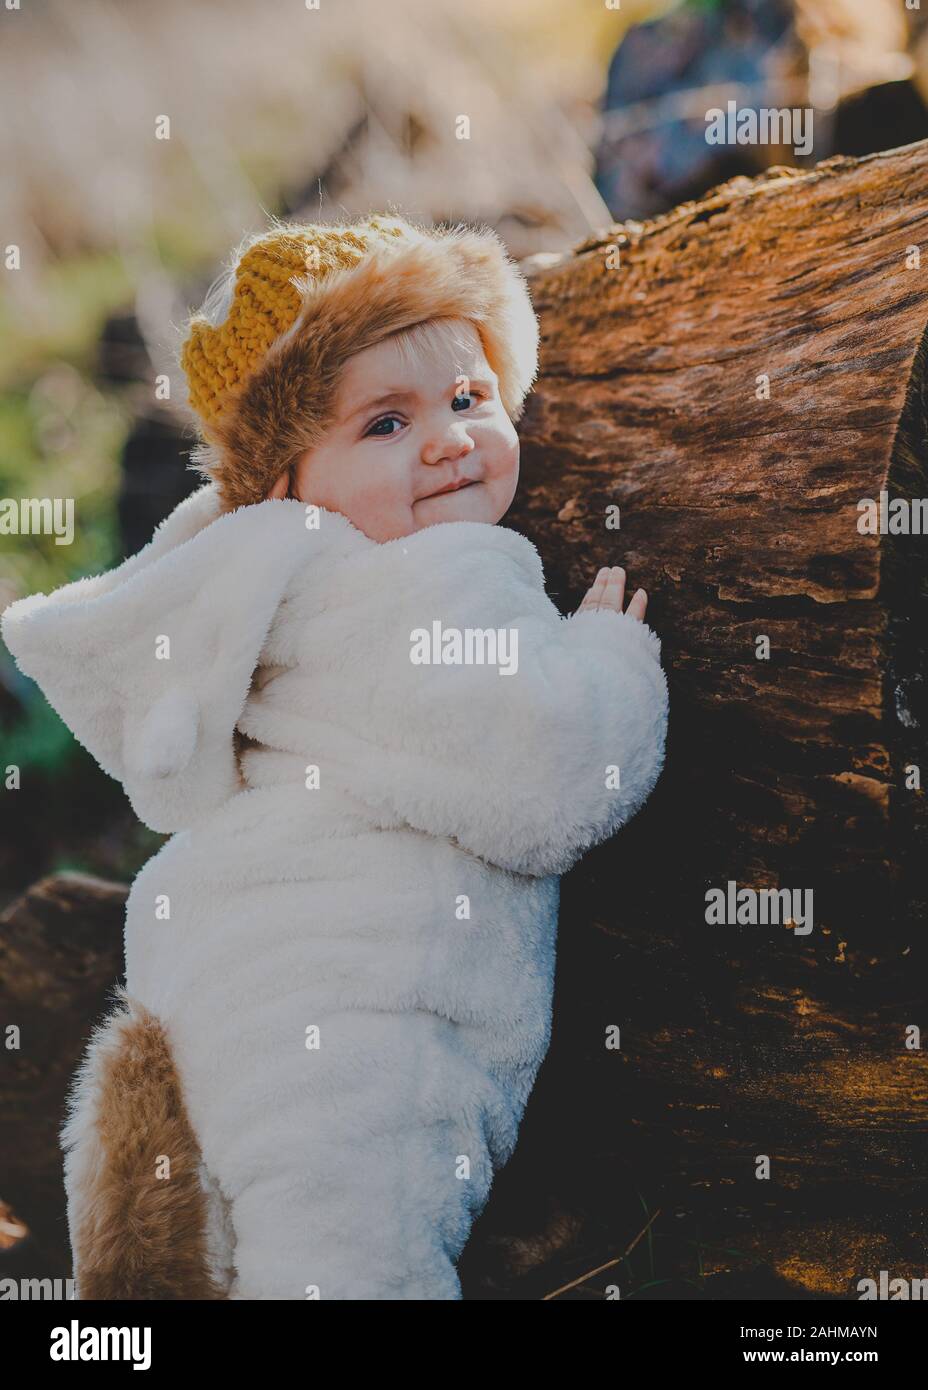 Little boy dressed as Max from Where The Wild Things Are in the woods Stock Photo